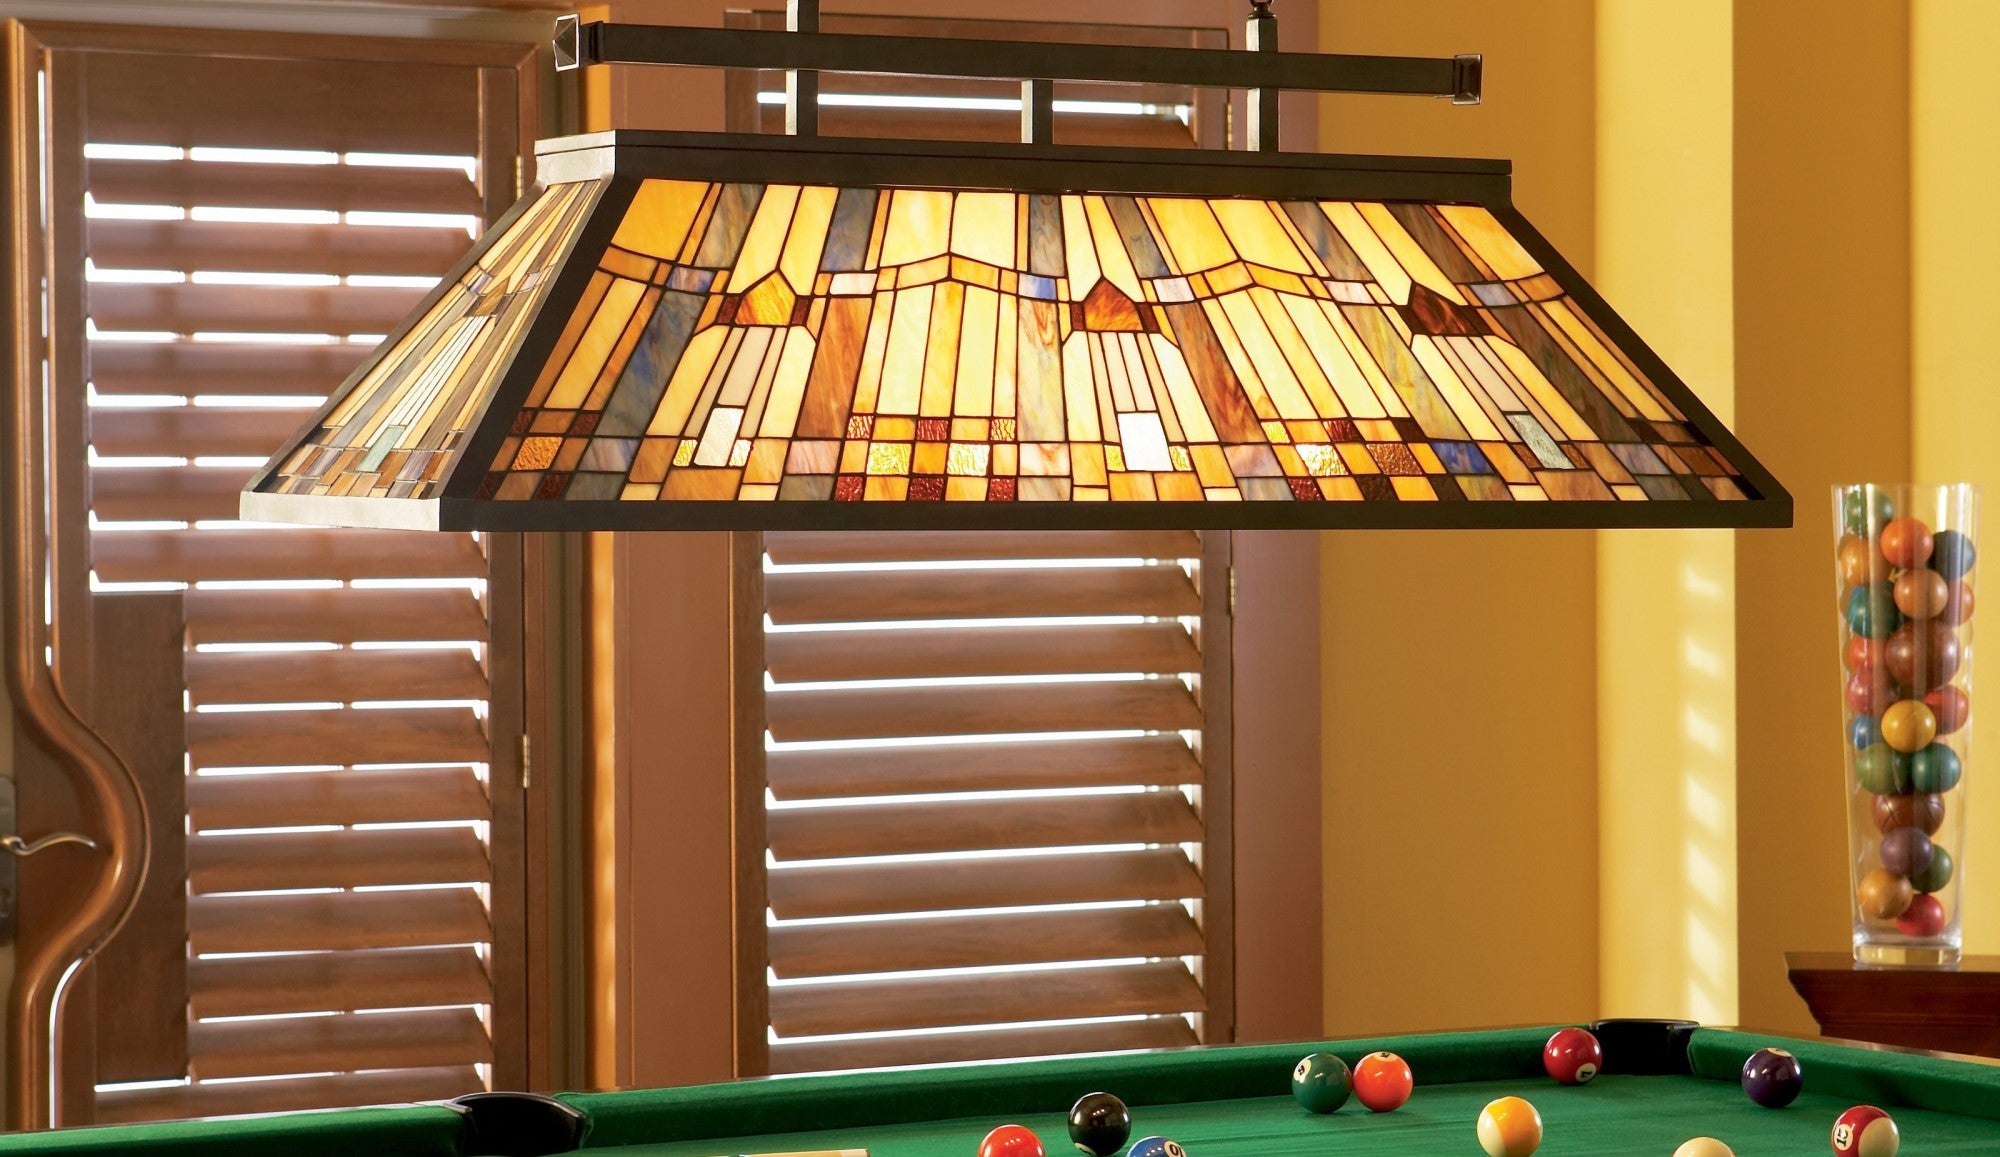 Top 6 Pool Table Lighting Options to Brighten Up Your Game Room